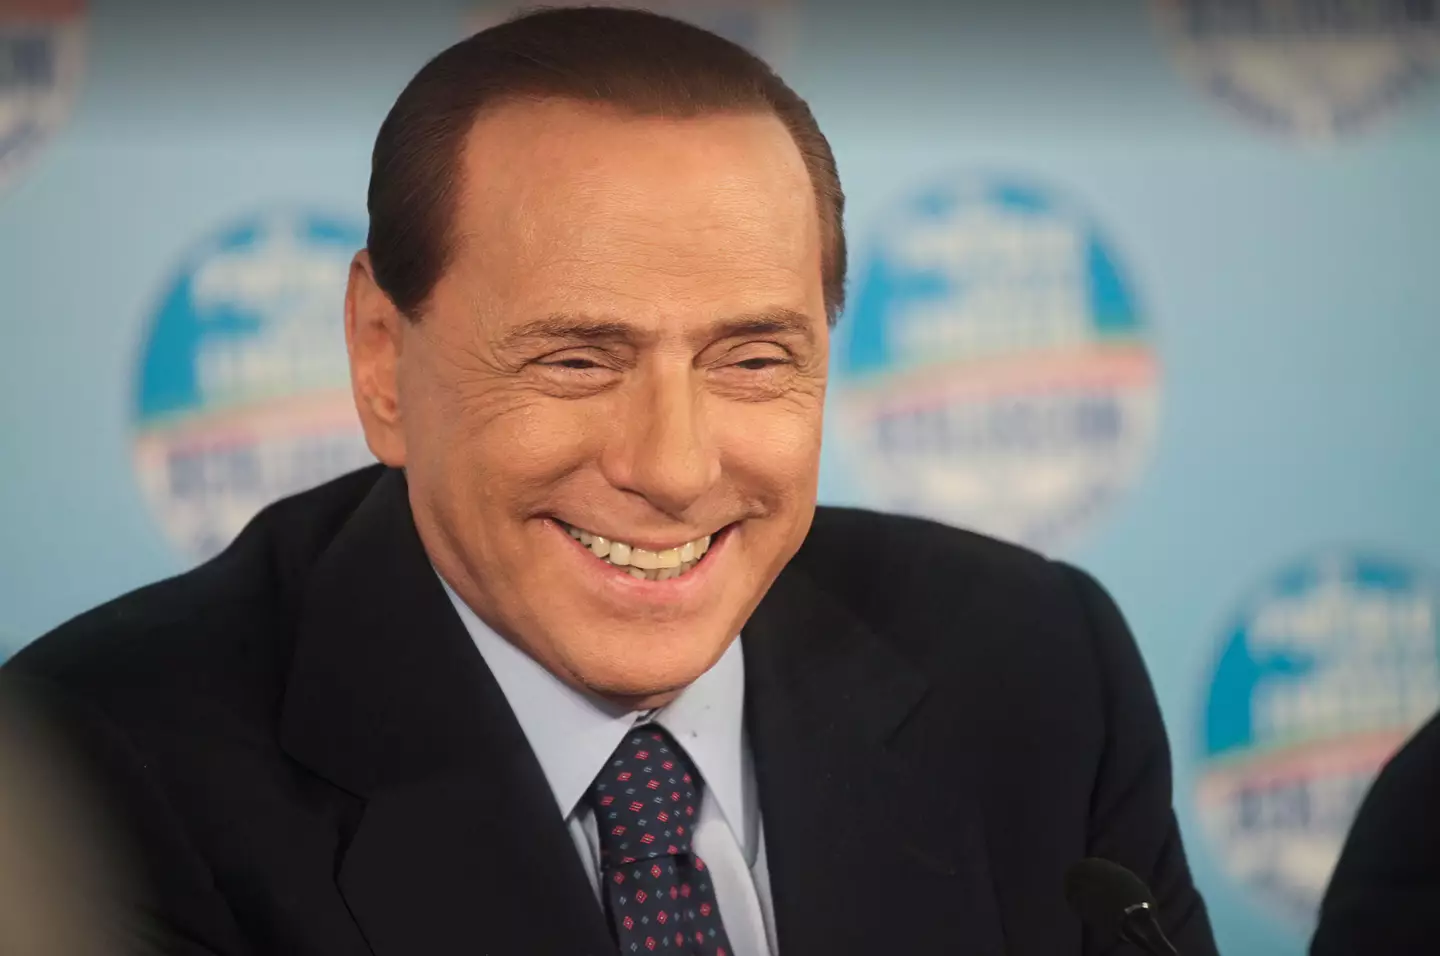 The former Italian PM has suffered a lot of ill health in recent years.